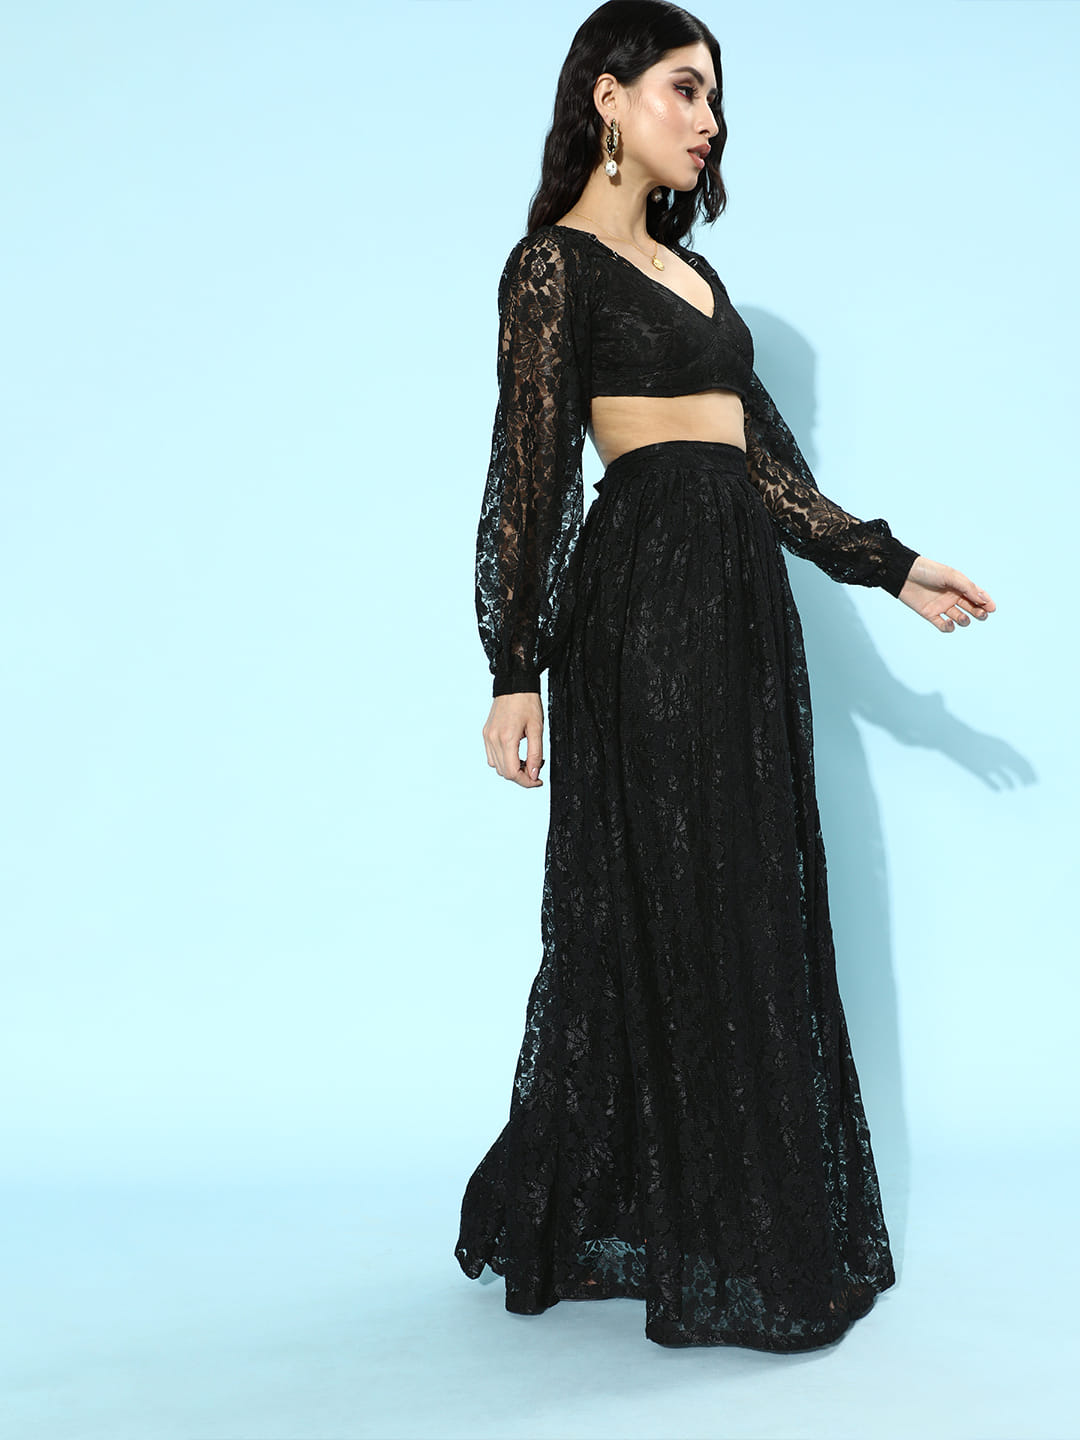 SCORPIUS Black Net Top and Skirt Coord Set